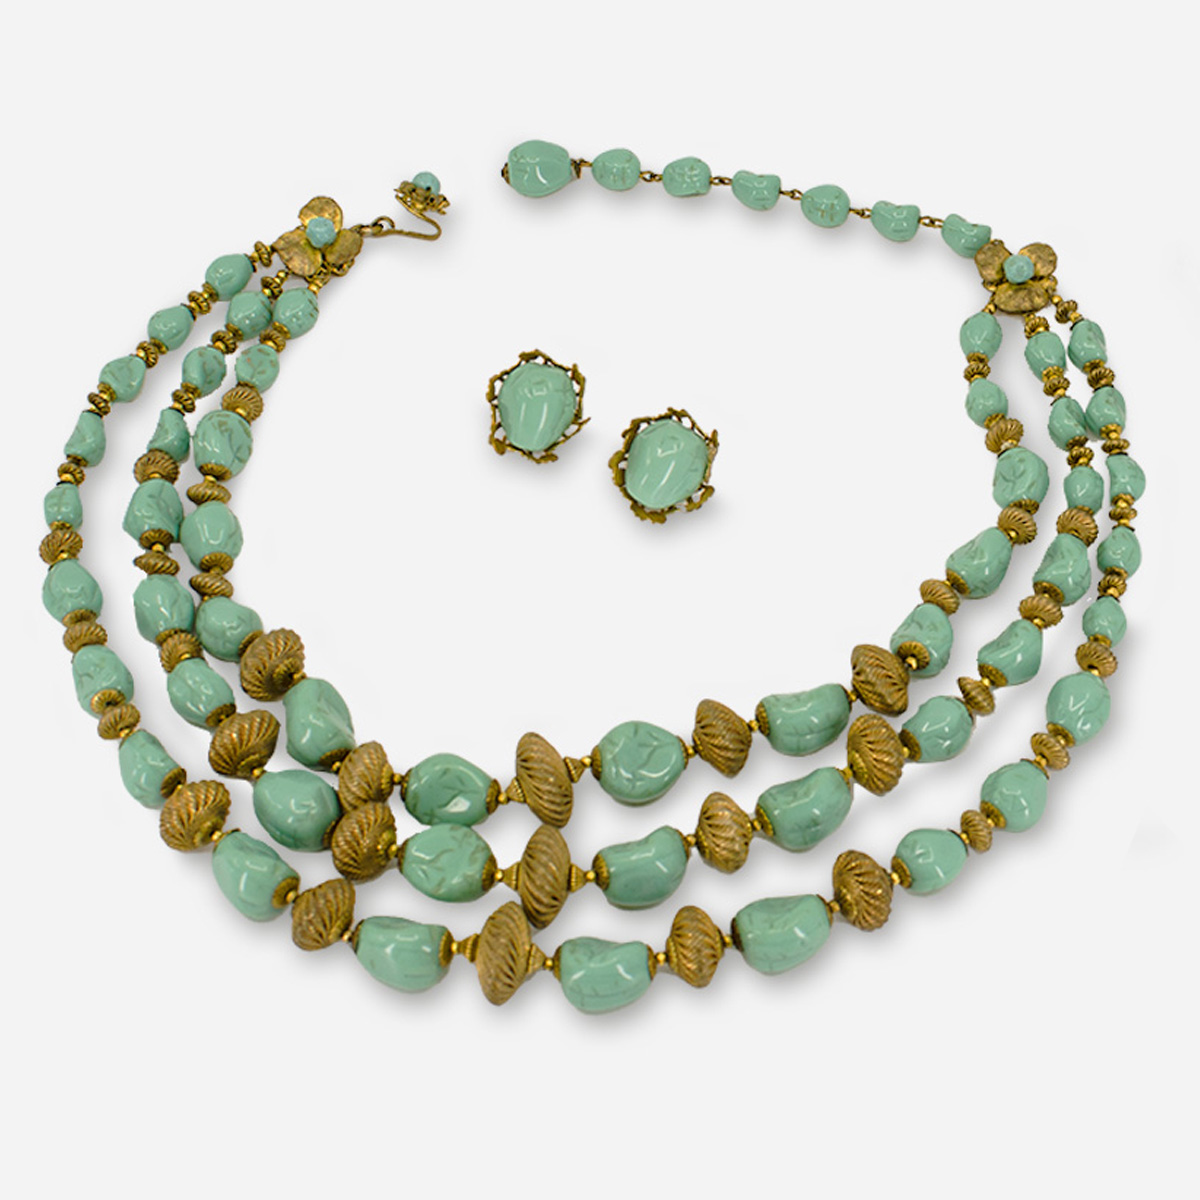 Haskell turquoise jewelry set